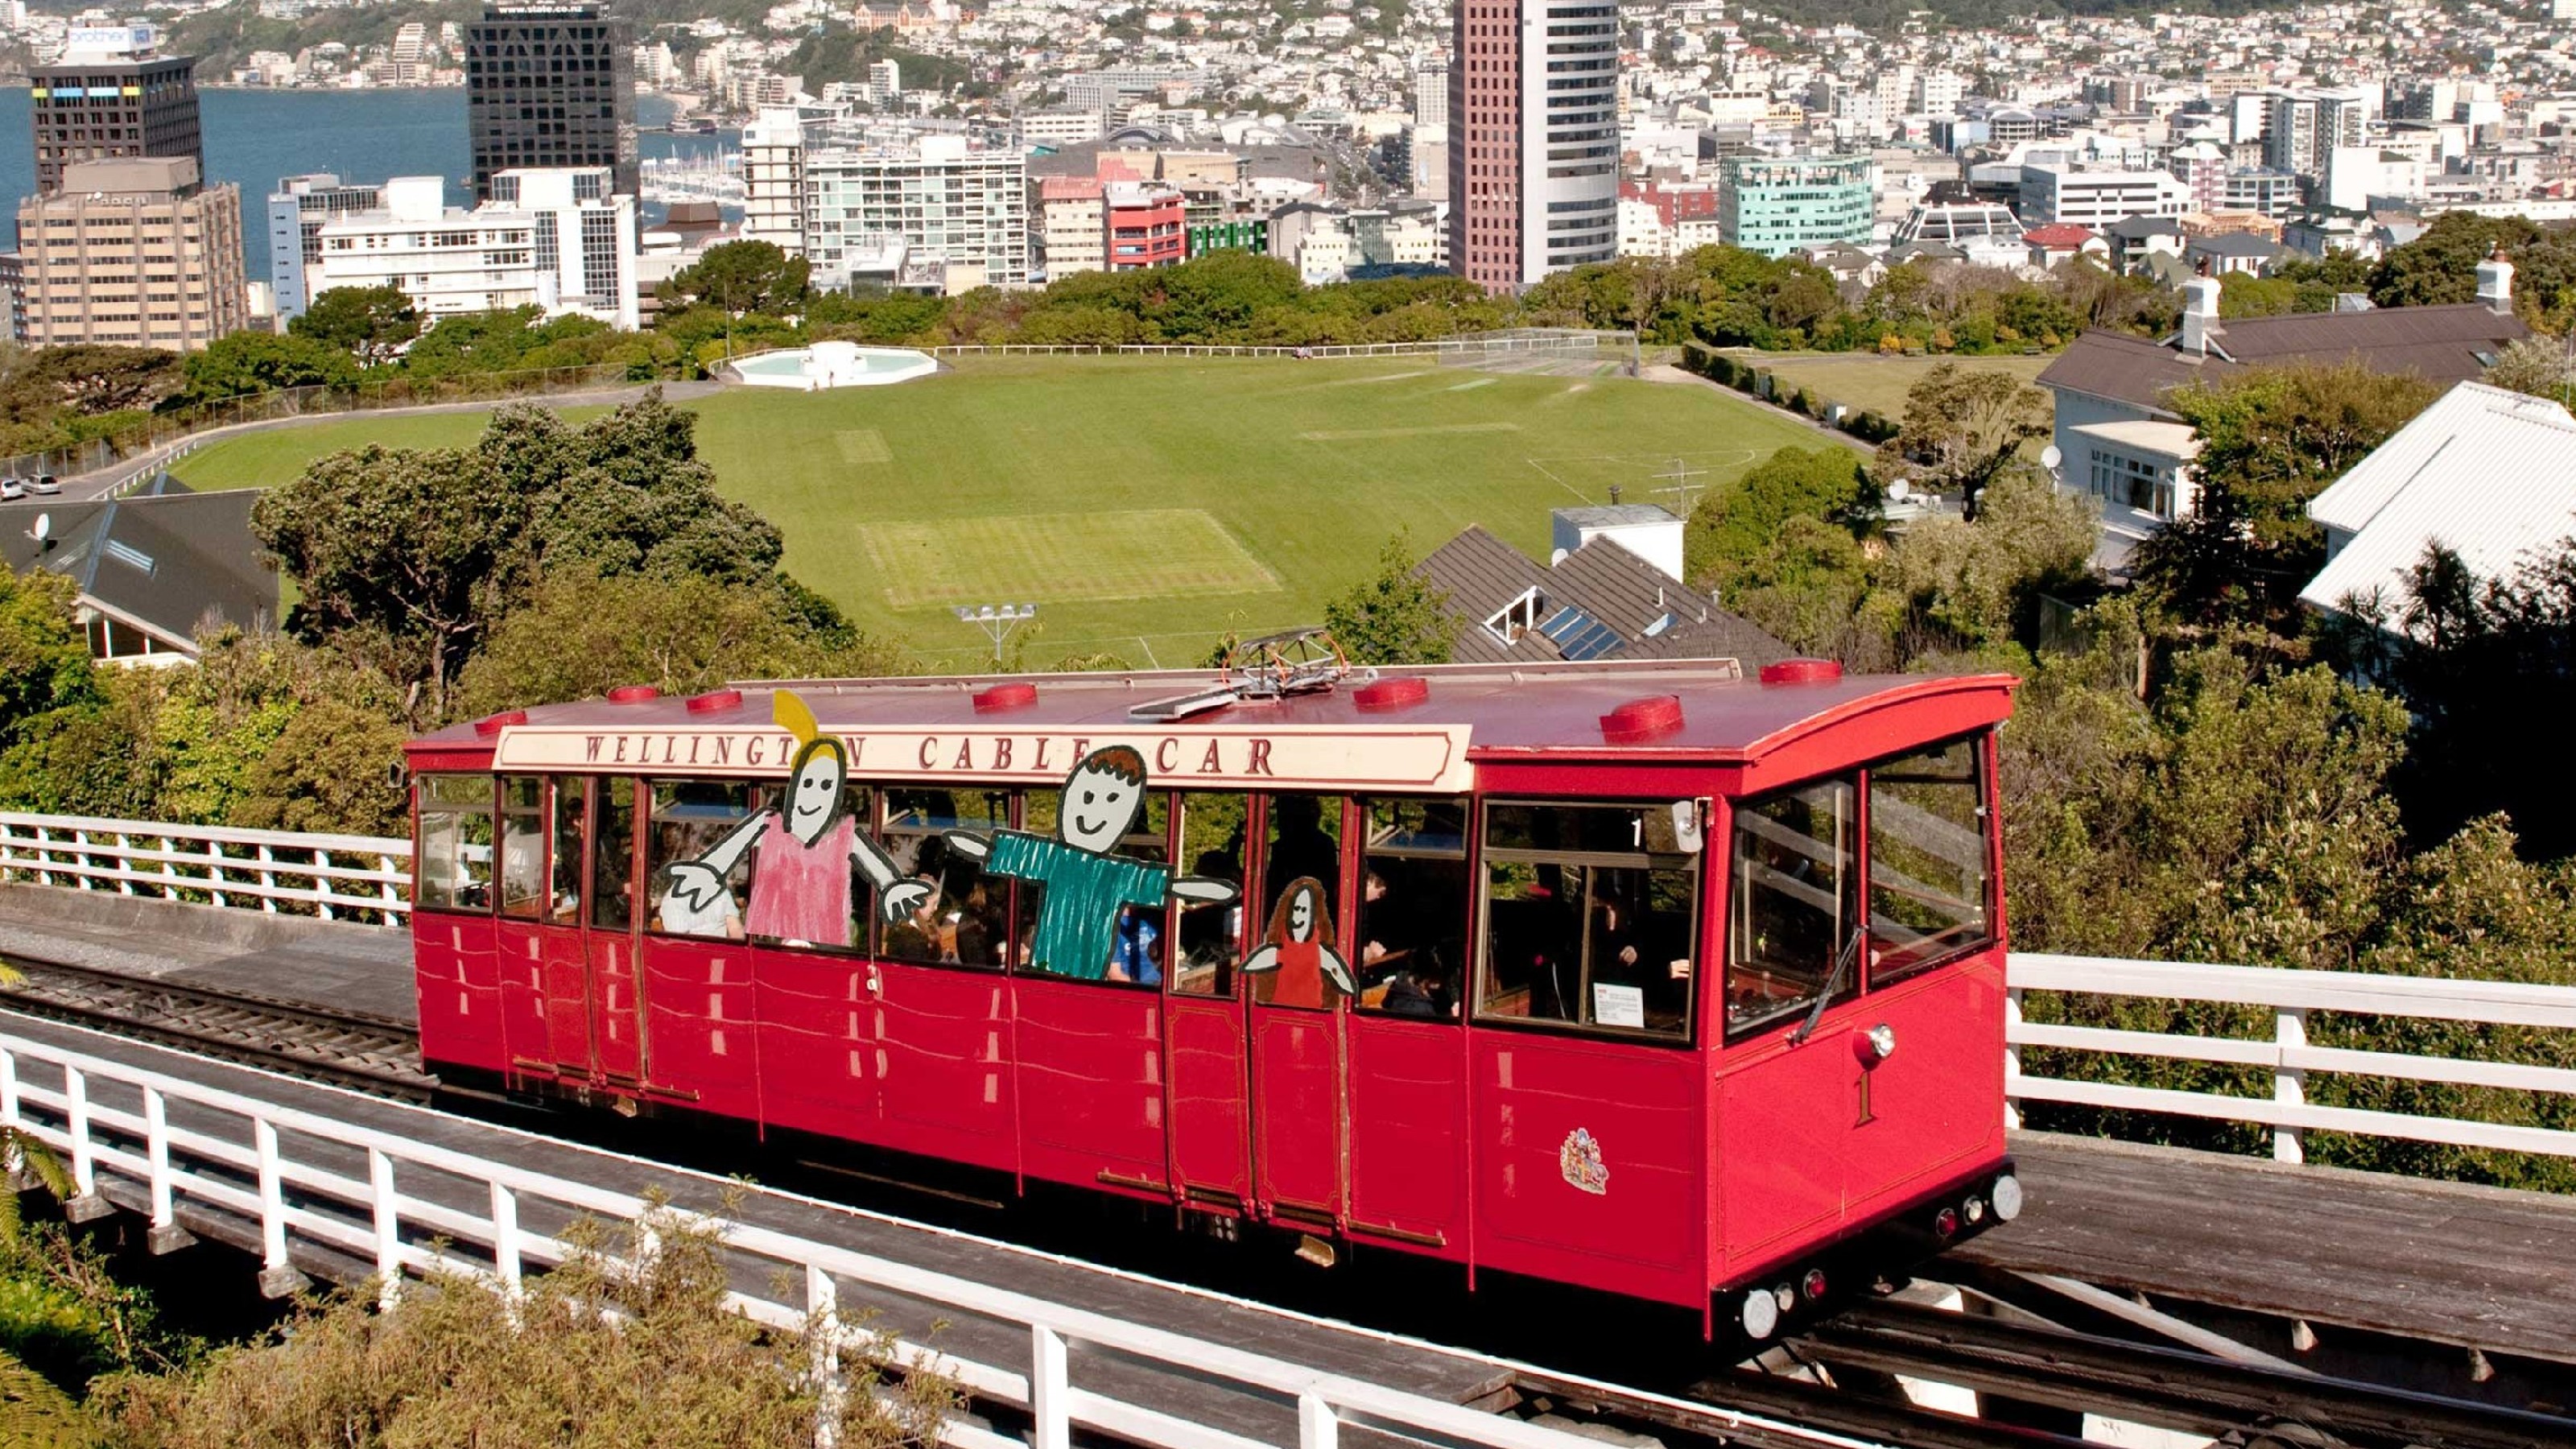 The Wellington Cable Car, overlaid with children's drawings of people in the window.